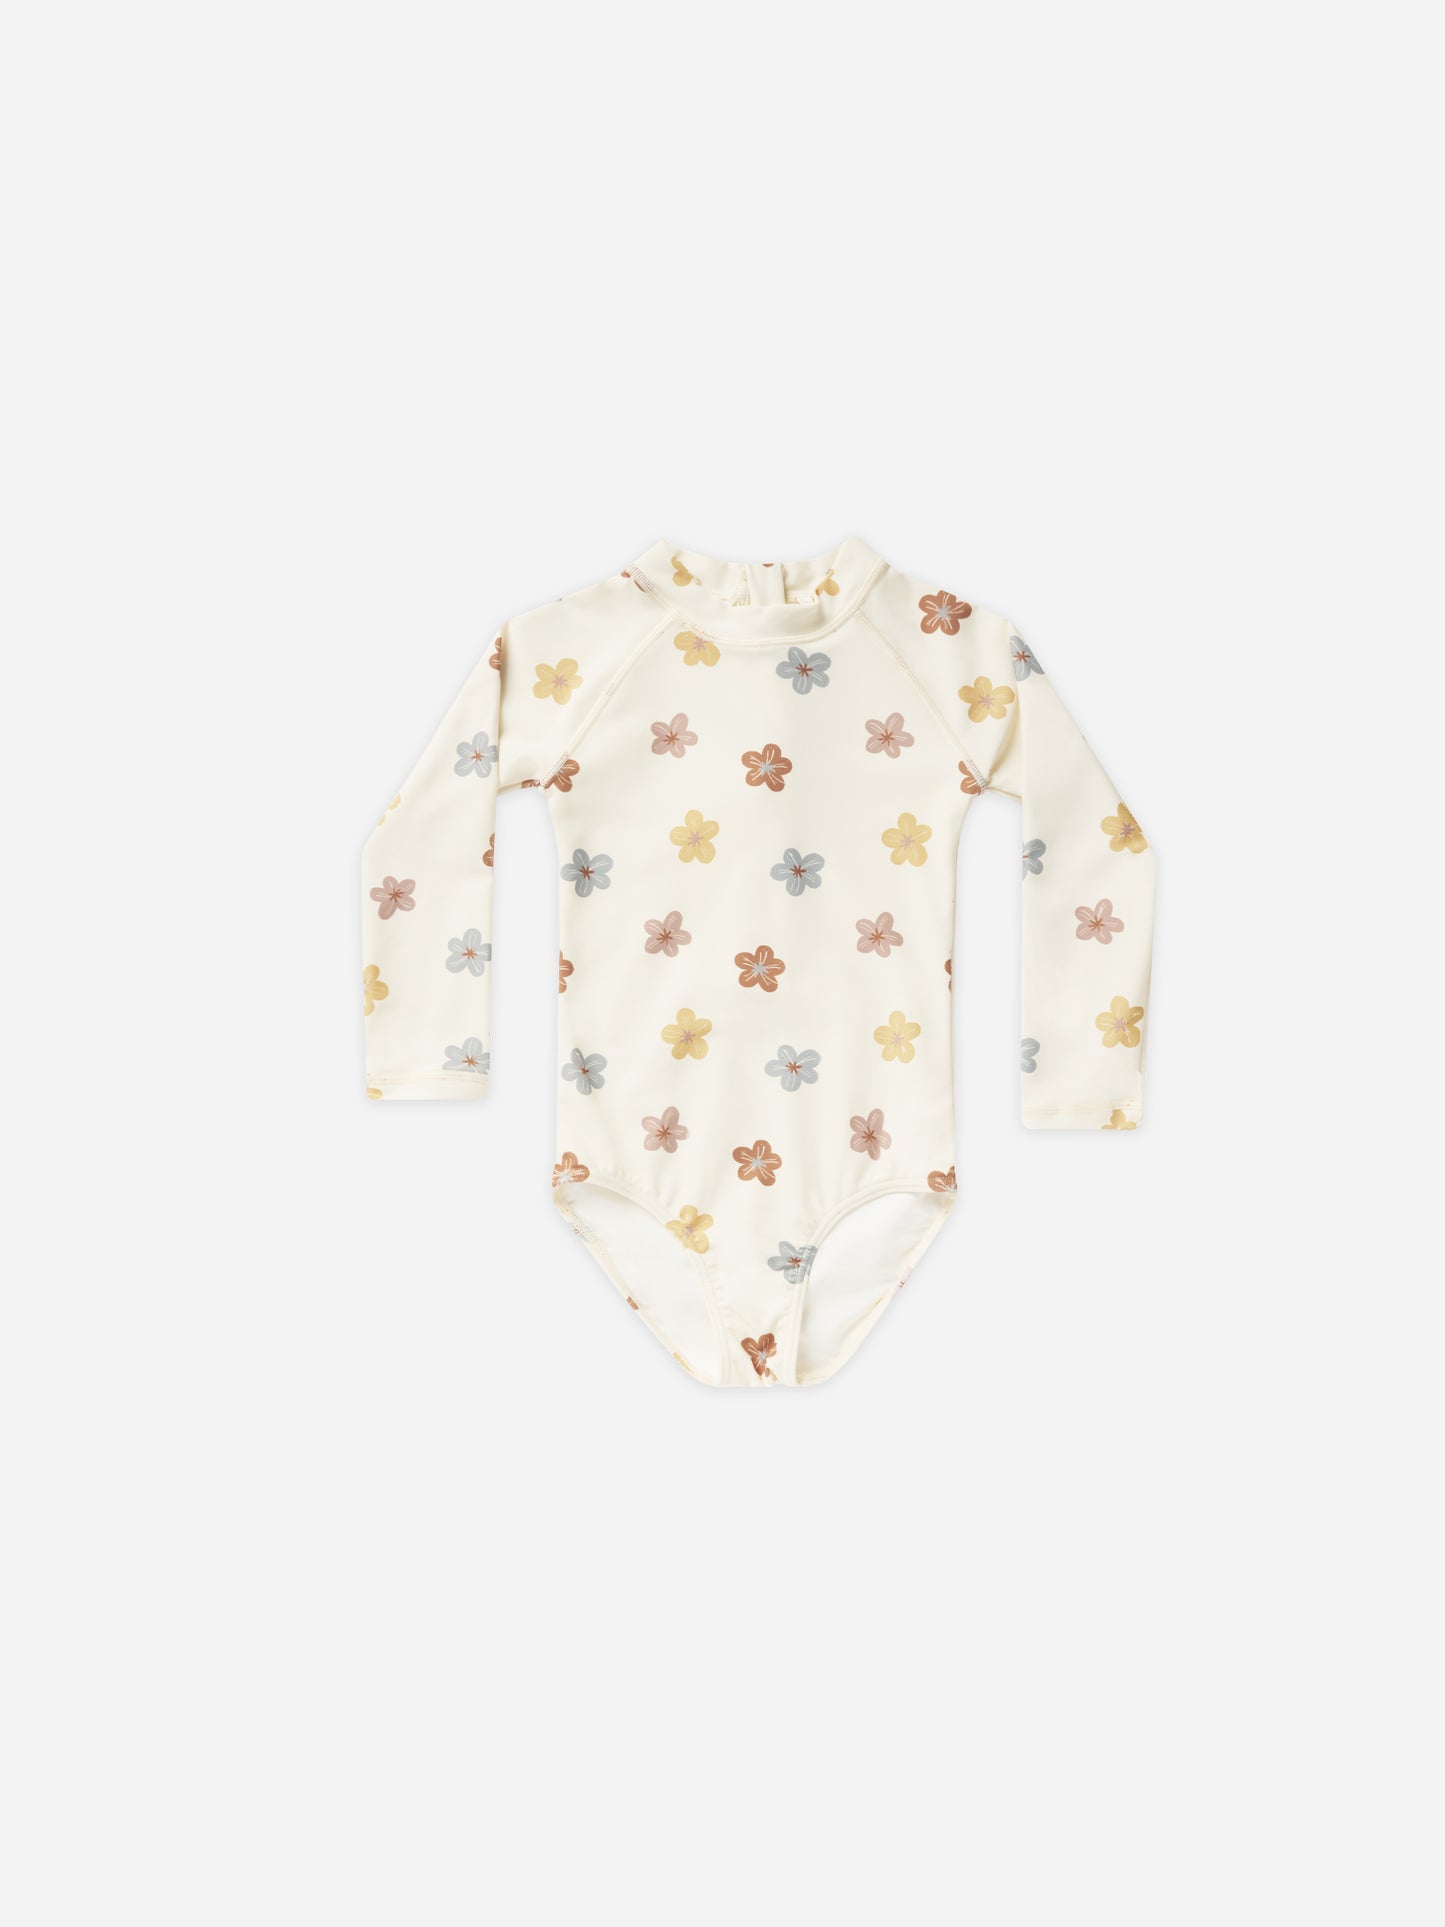 Delphine Rash Guard One-Piece || Leilani - Rylee + Cru | Kids Clothes | Trendy Baby Clothes | Modern Infant Outfits |